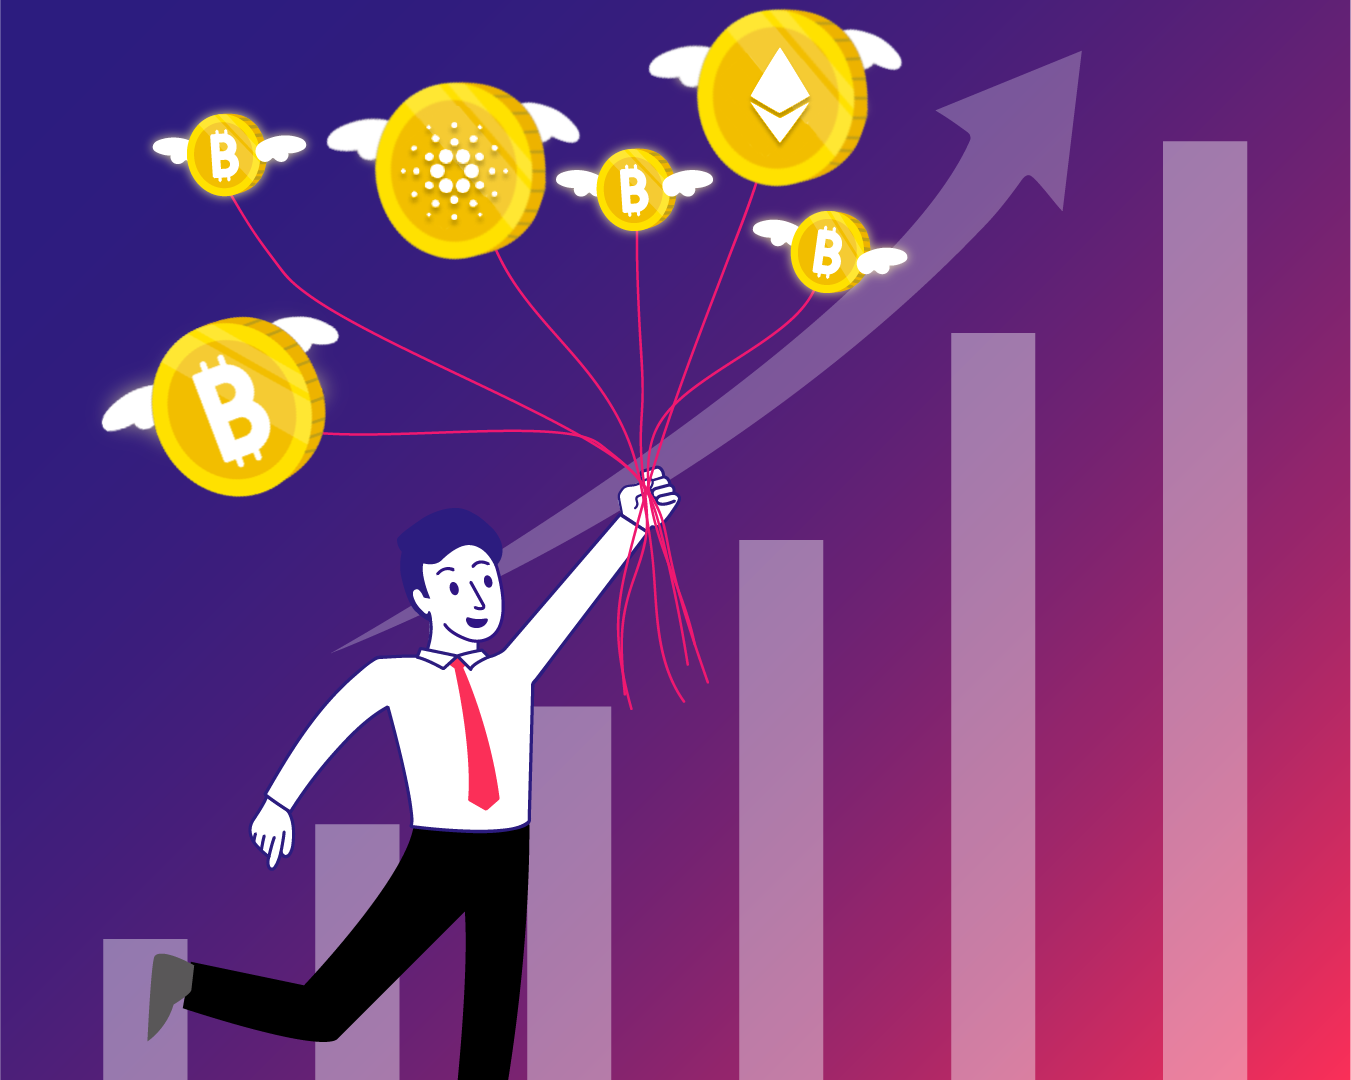 Top 5 Fastest Growing Cryptocurrencies In 2021